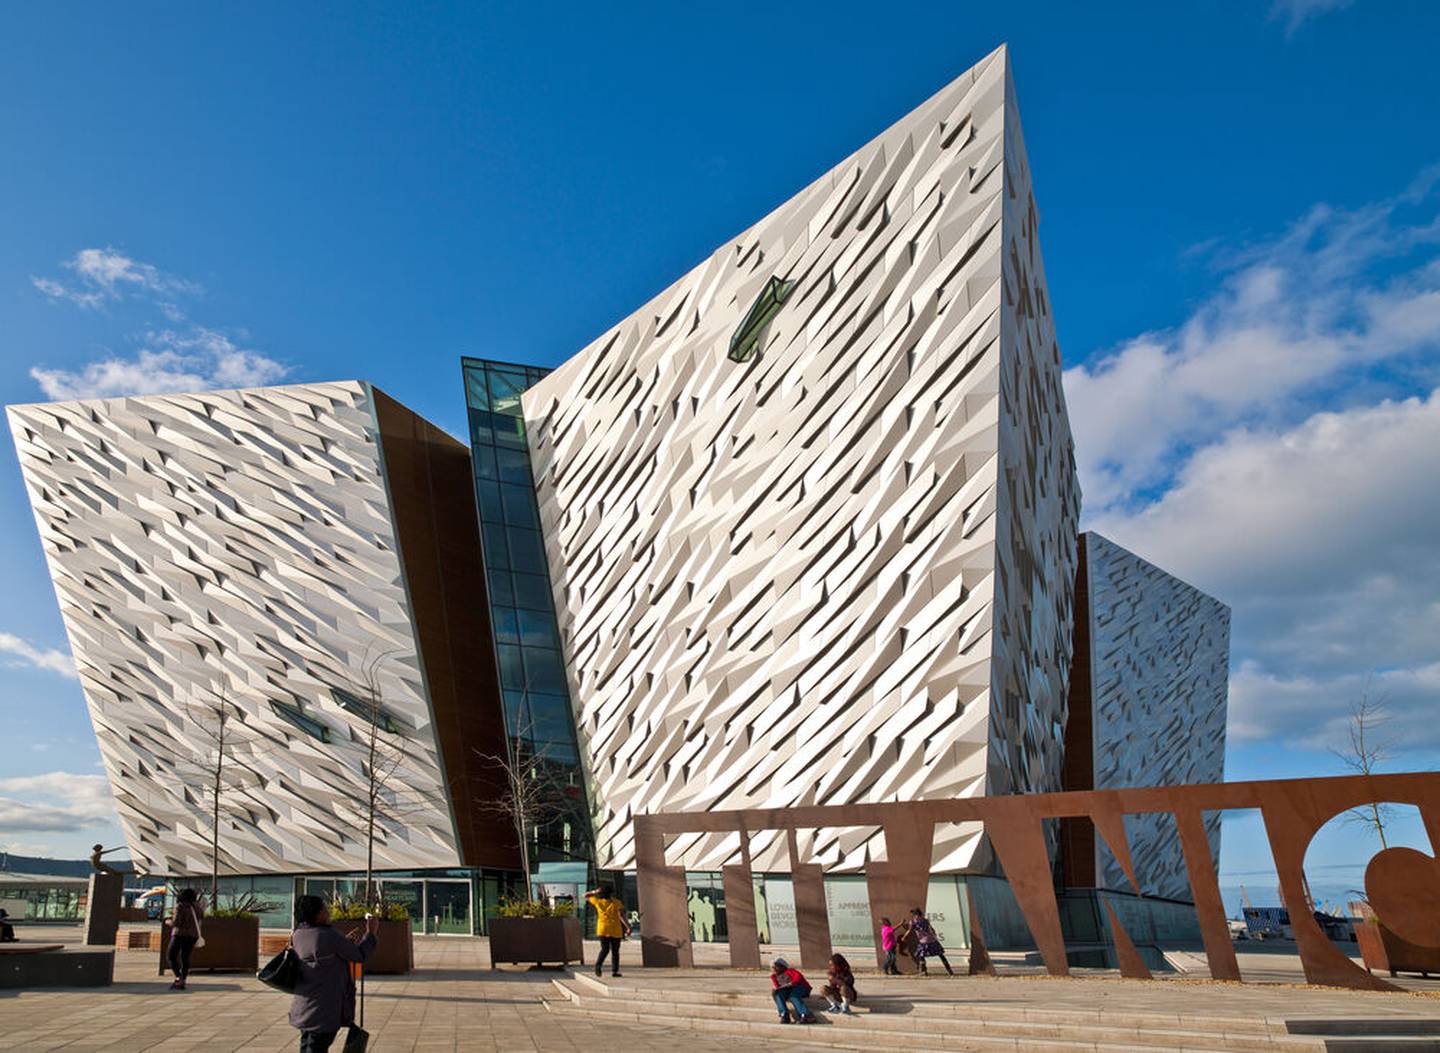 Built on the slipways where the ship itself was constructed more than 100 years ago, Titanic Belfast will reopen in February with a new interactive exhibition. Photo: Tourism Ireland